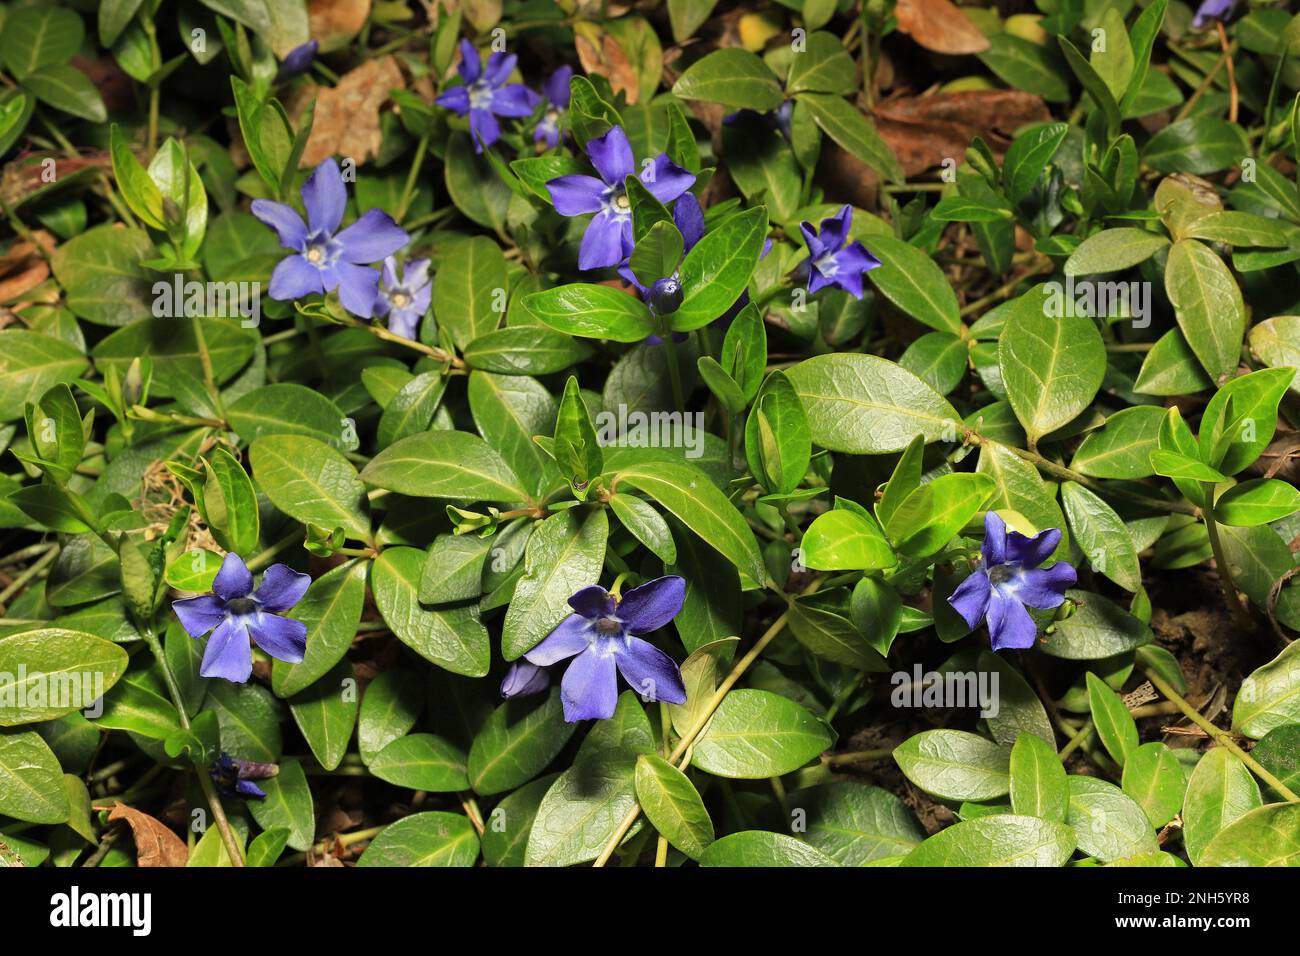 Blue flowers and green leaves of the vinca vine as a ground cover in the spring in St. Croix Falls, Wisconsin USA. Stock Photo